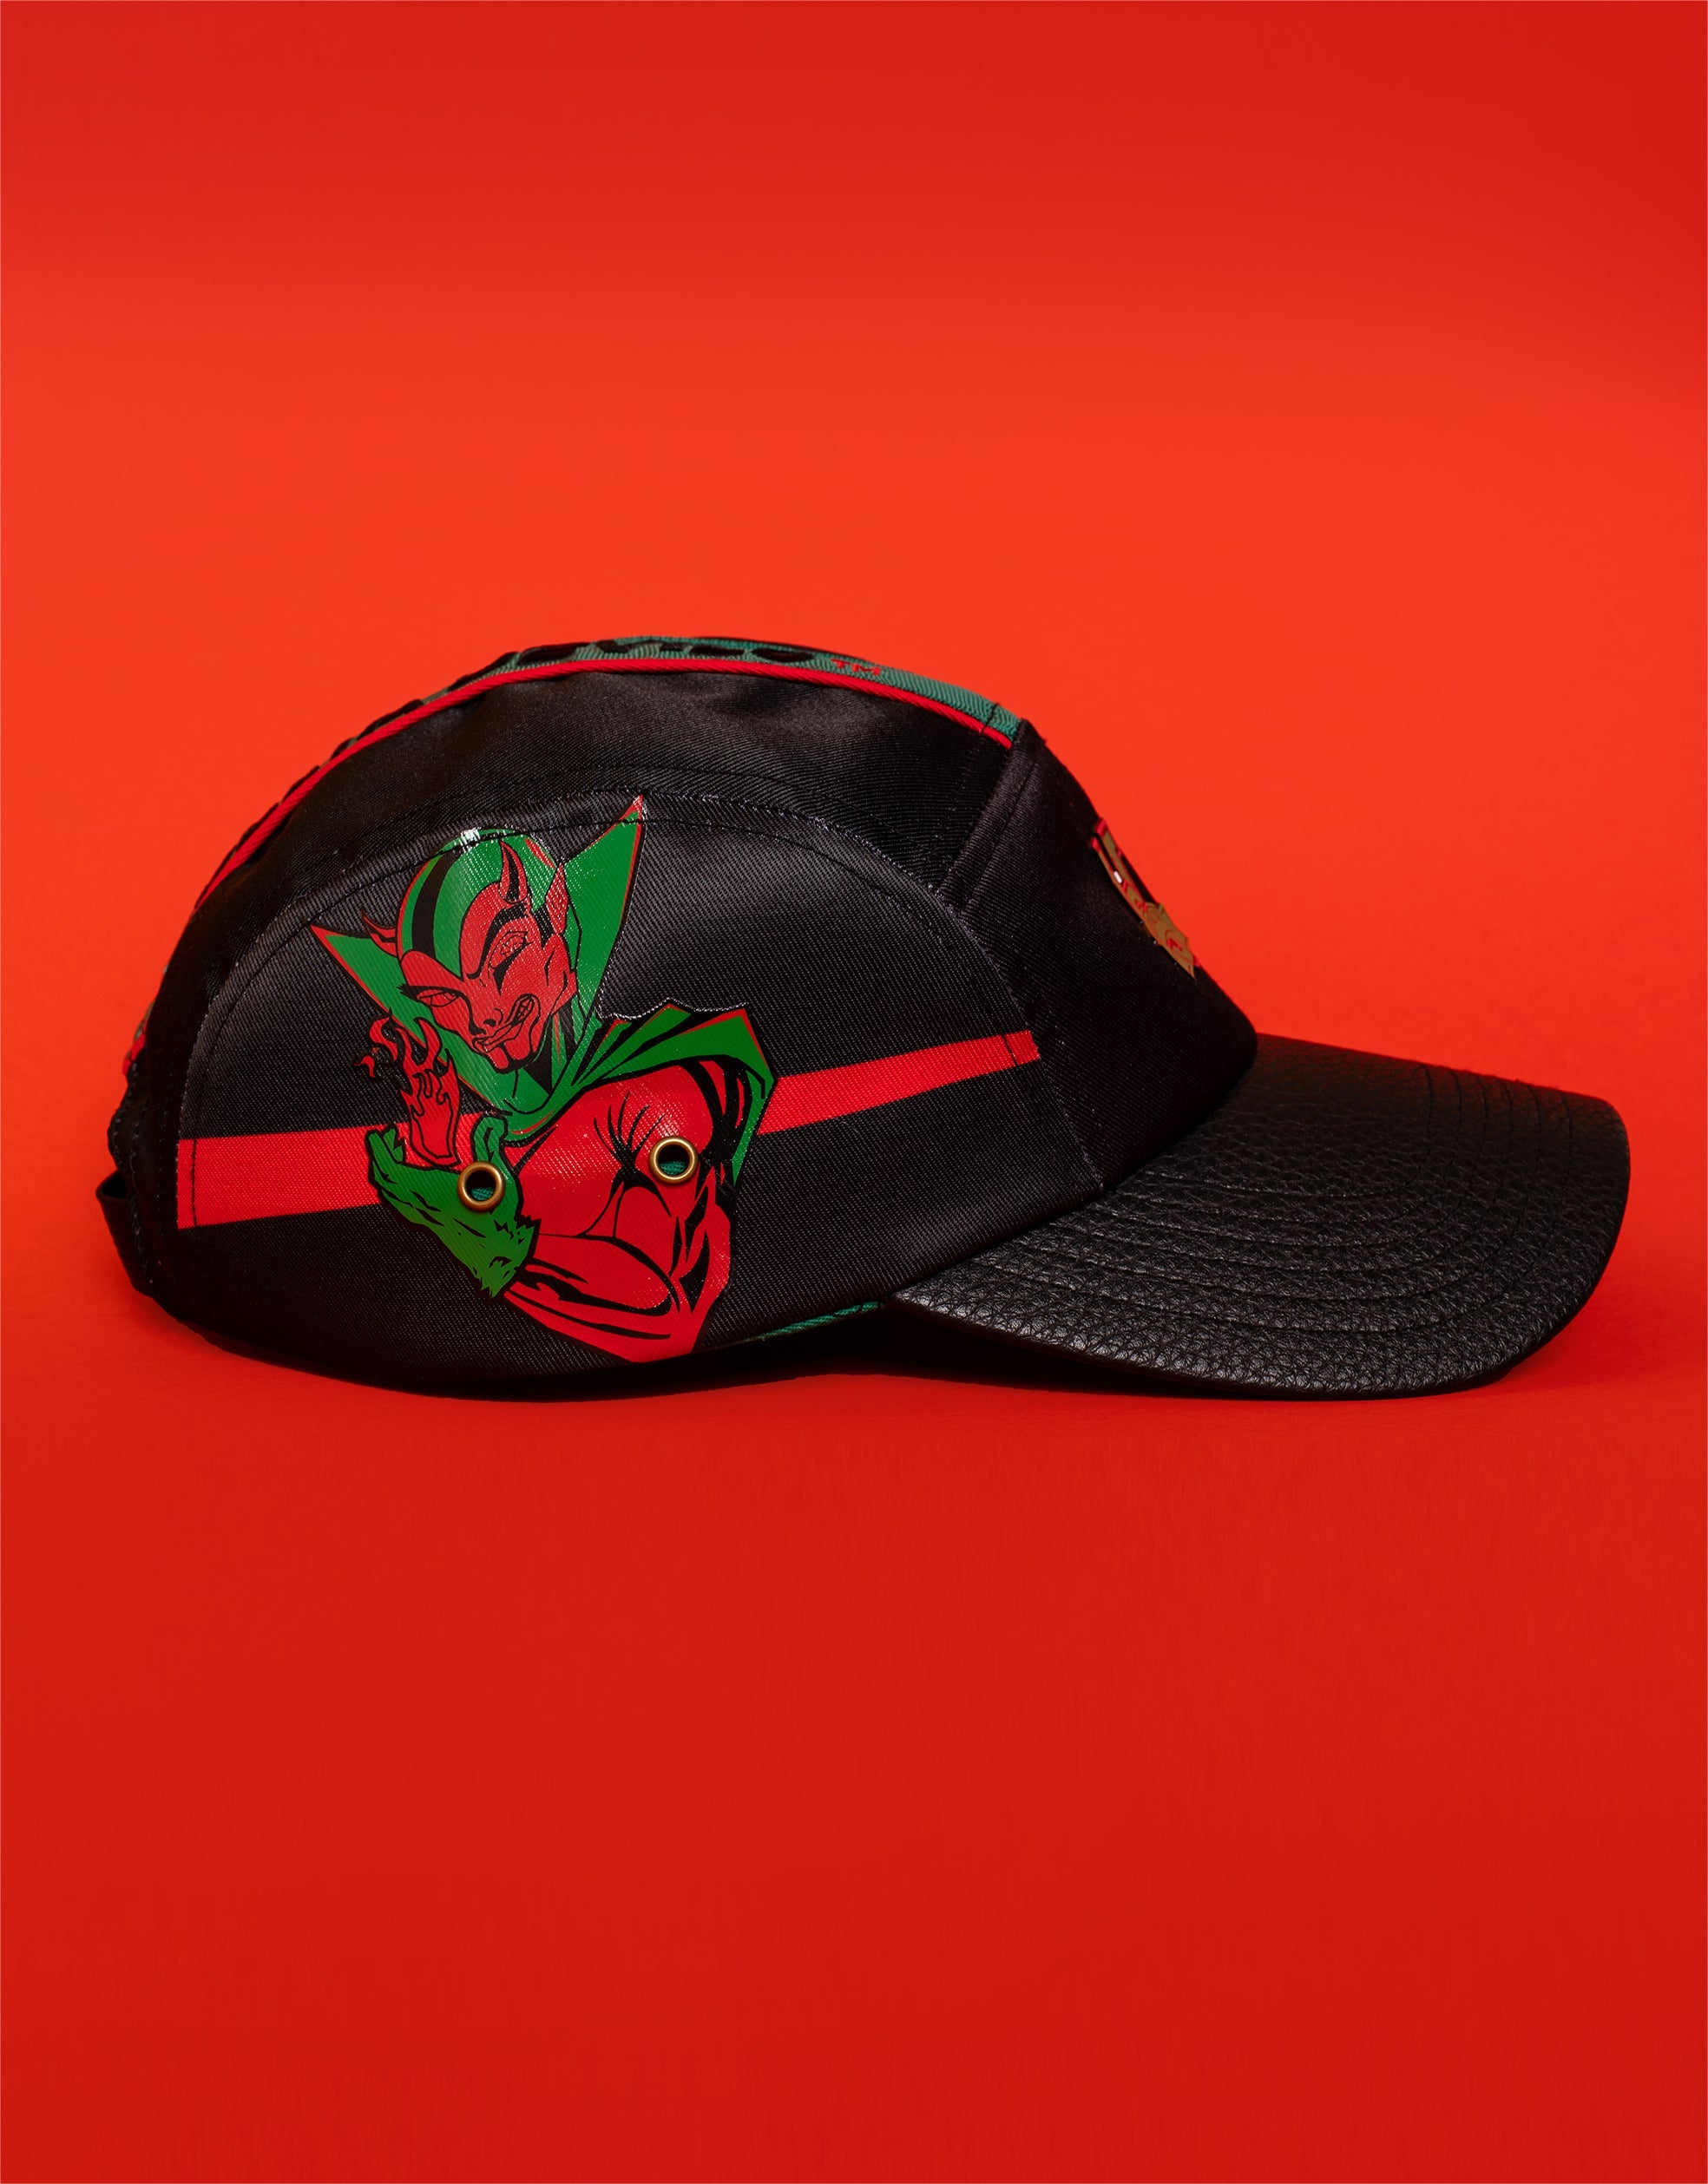 TheYard - BLACKOUT - Mississippi Valley State University - HBCU Hat